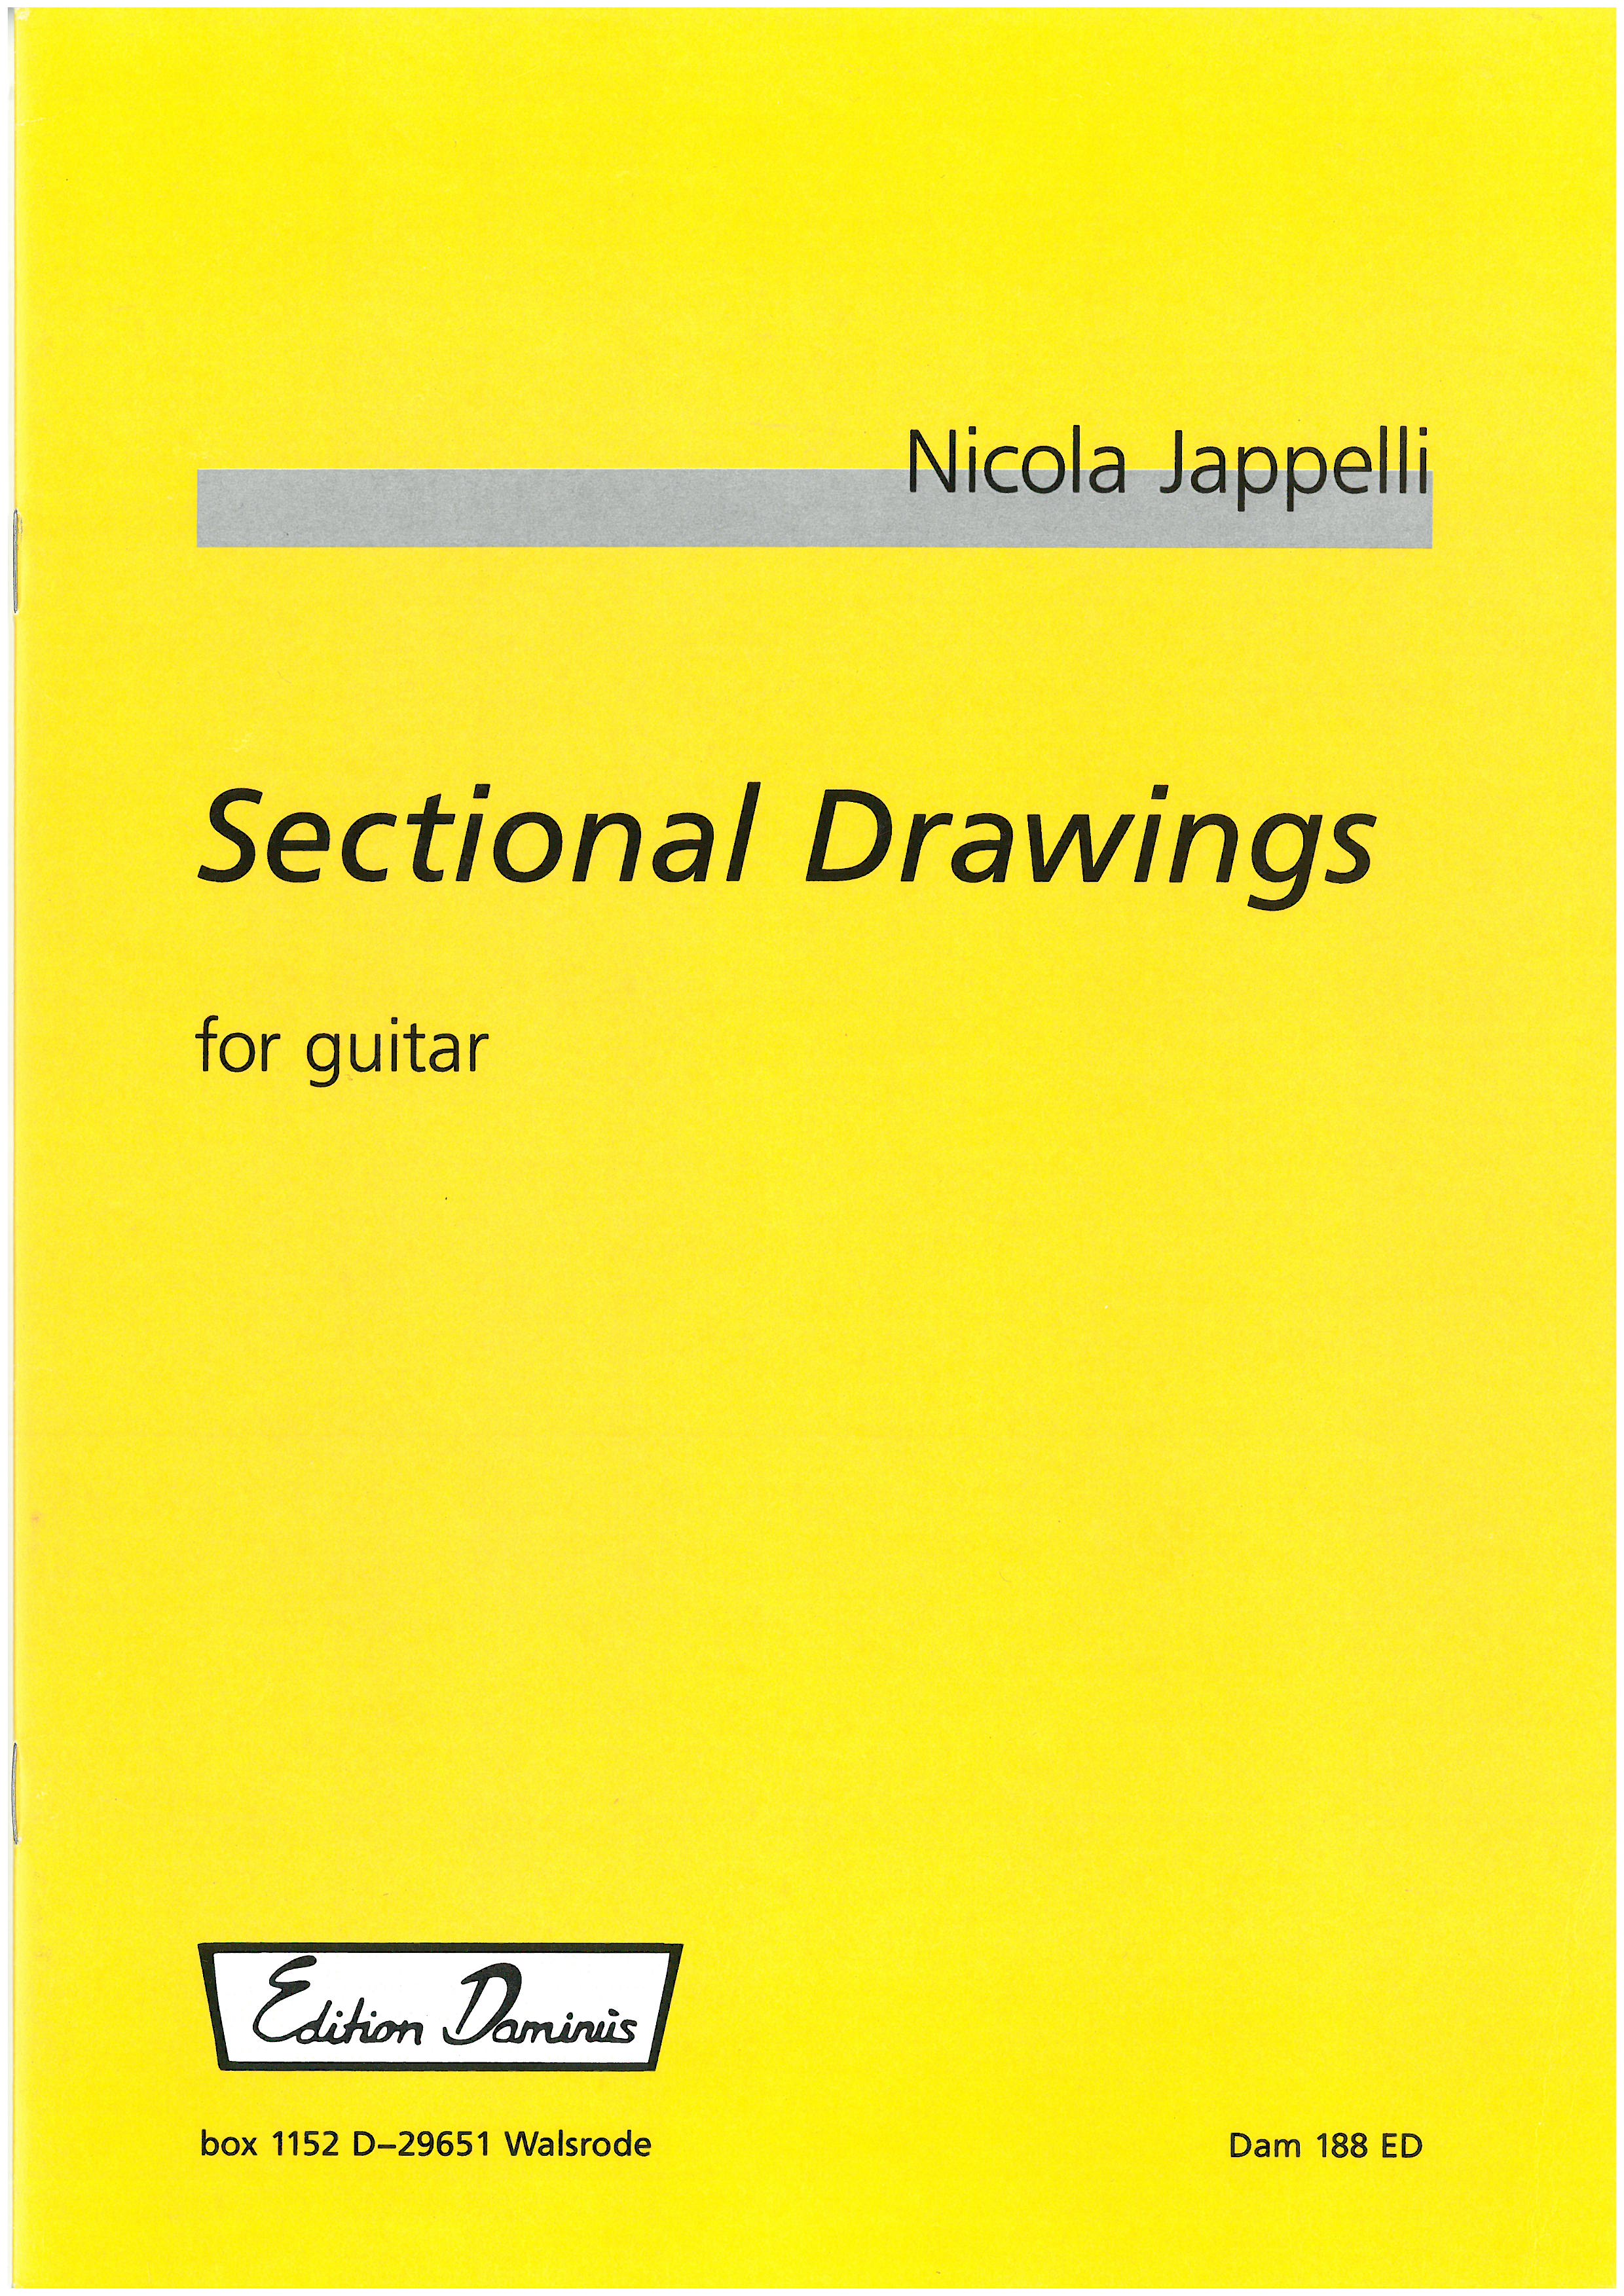 Sectional Drawings